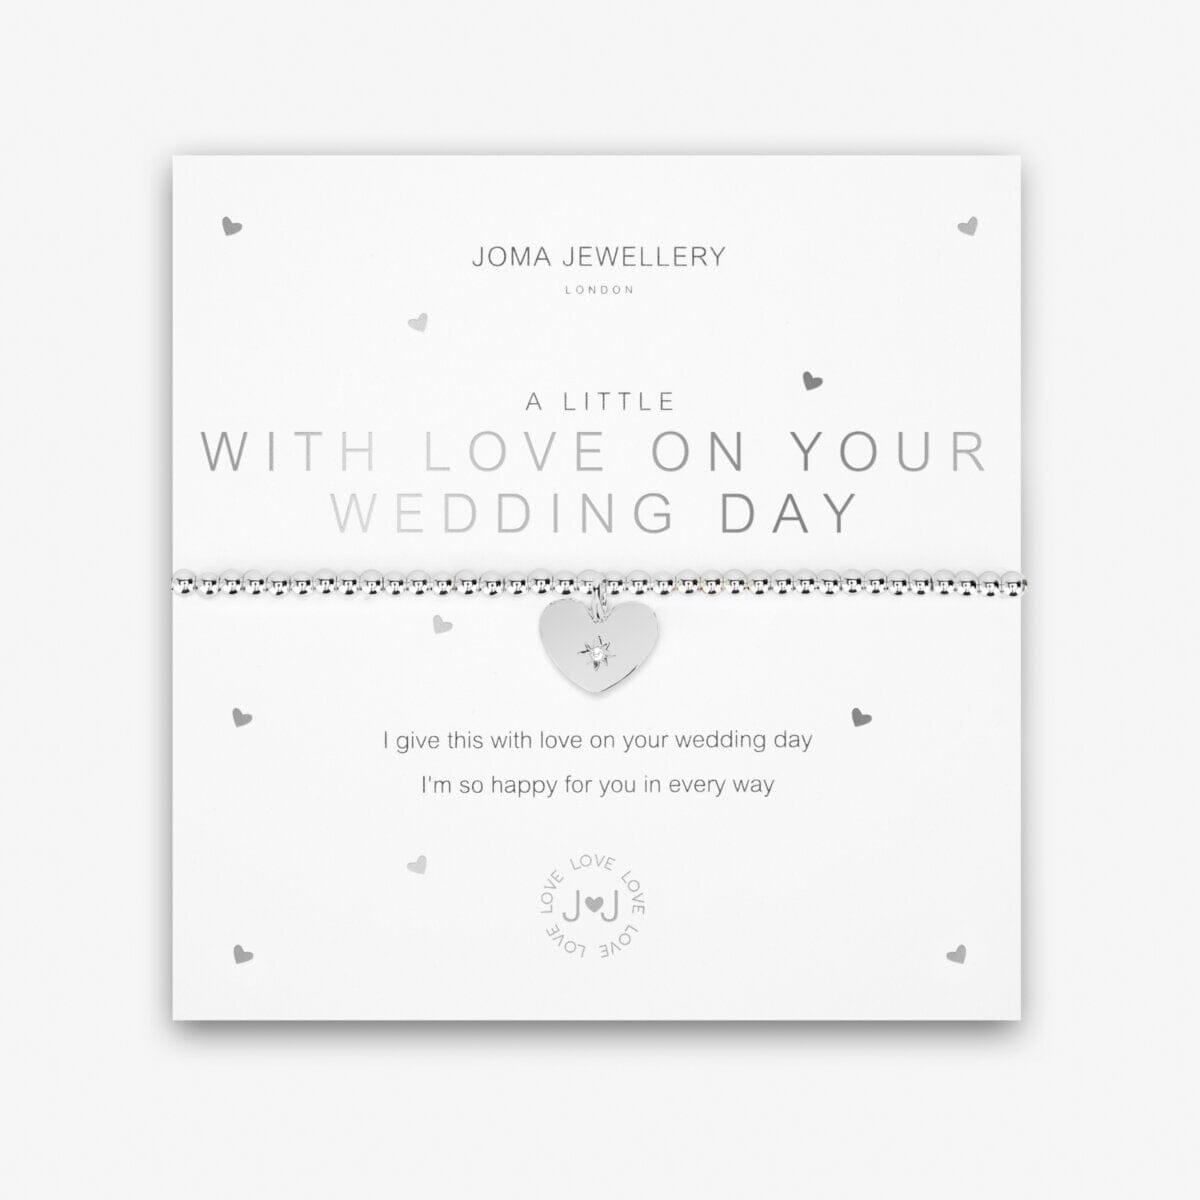 Joma A Little - On Your Wedding Day Joma A Littles Joma Jewellery 